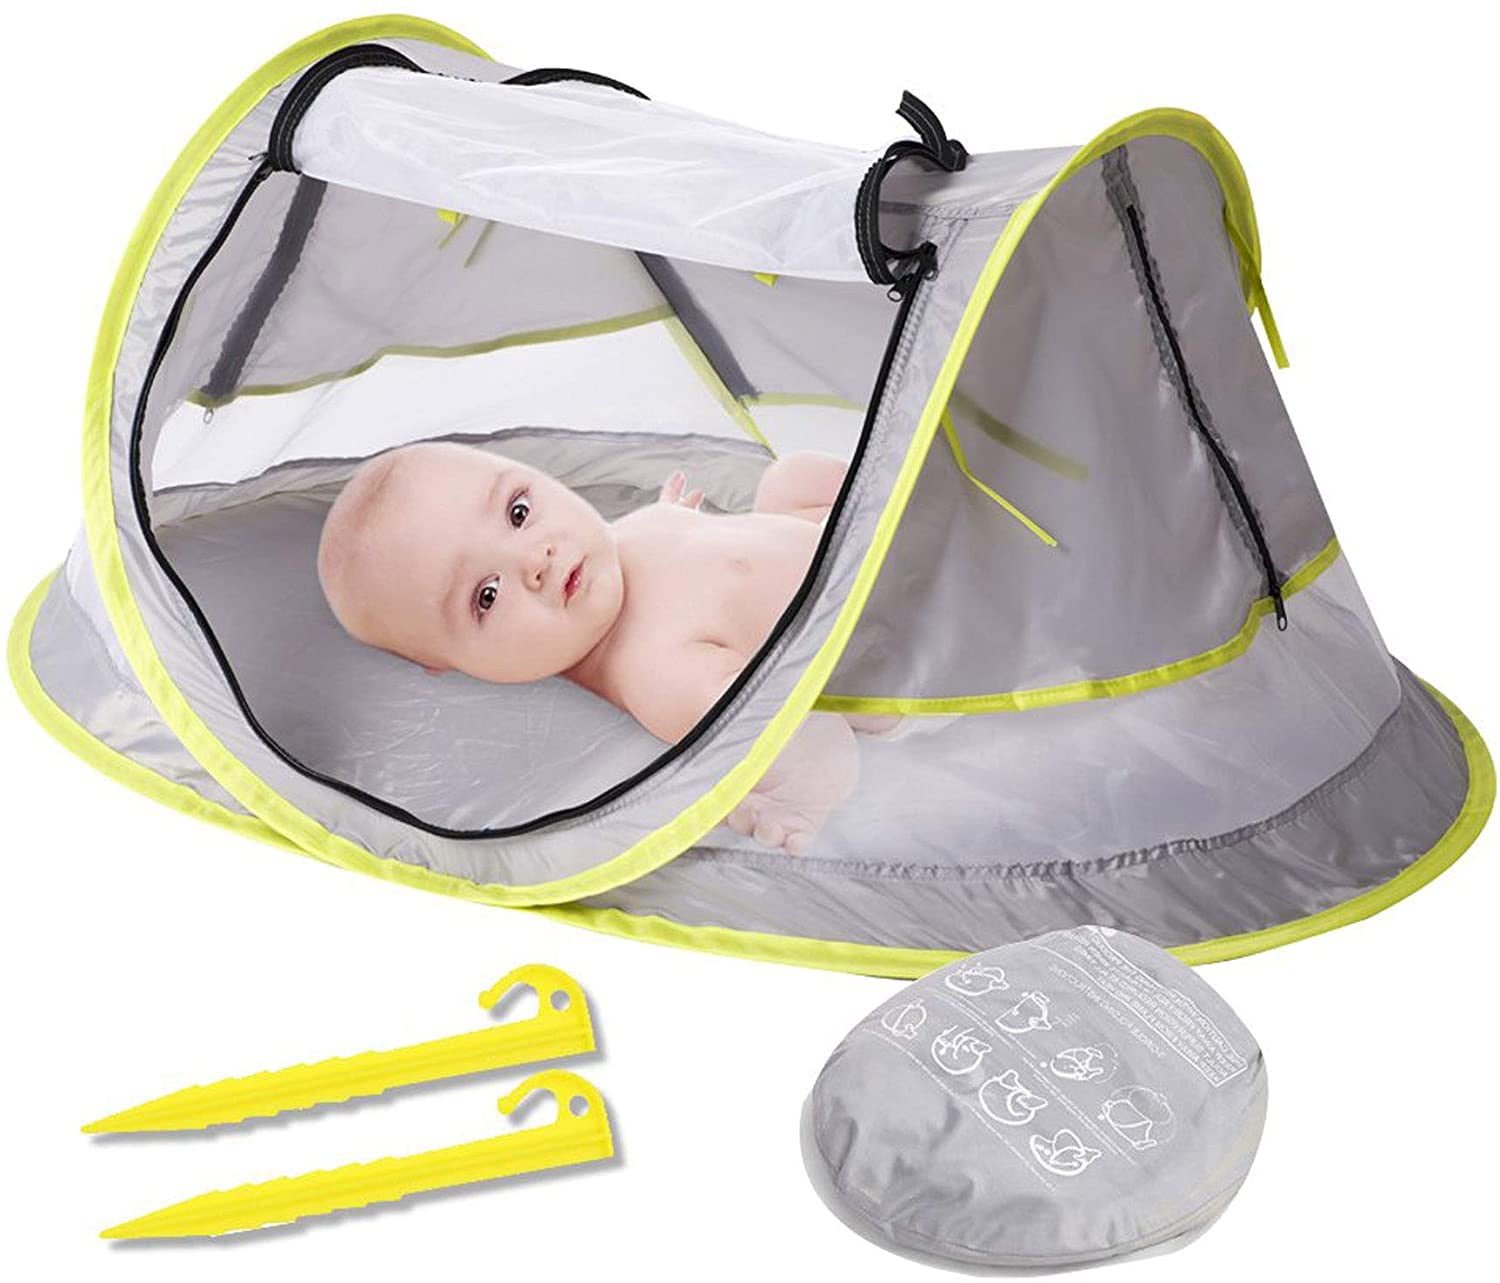 Infant Mosquito Net and Sunshade for Baby Crib Folding Baby Crib Tent Shelters for Infant Large Baby Portable Beach Play Tent Pop Up Baby Travel Bed